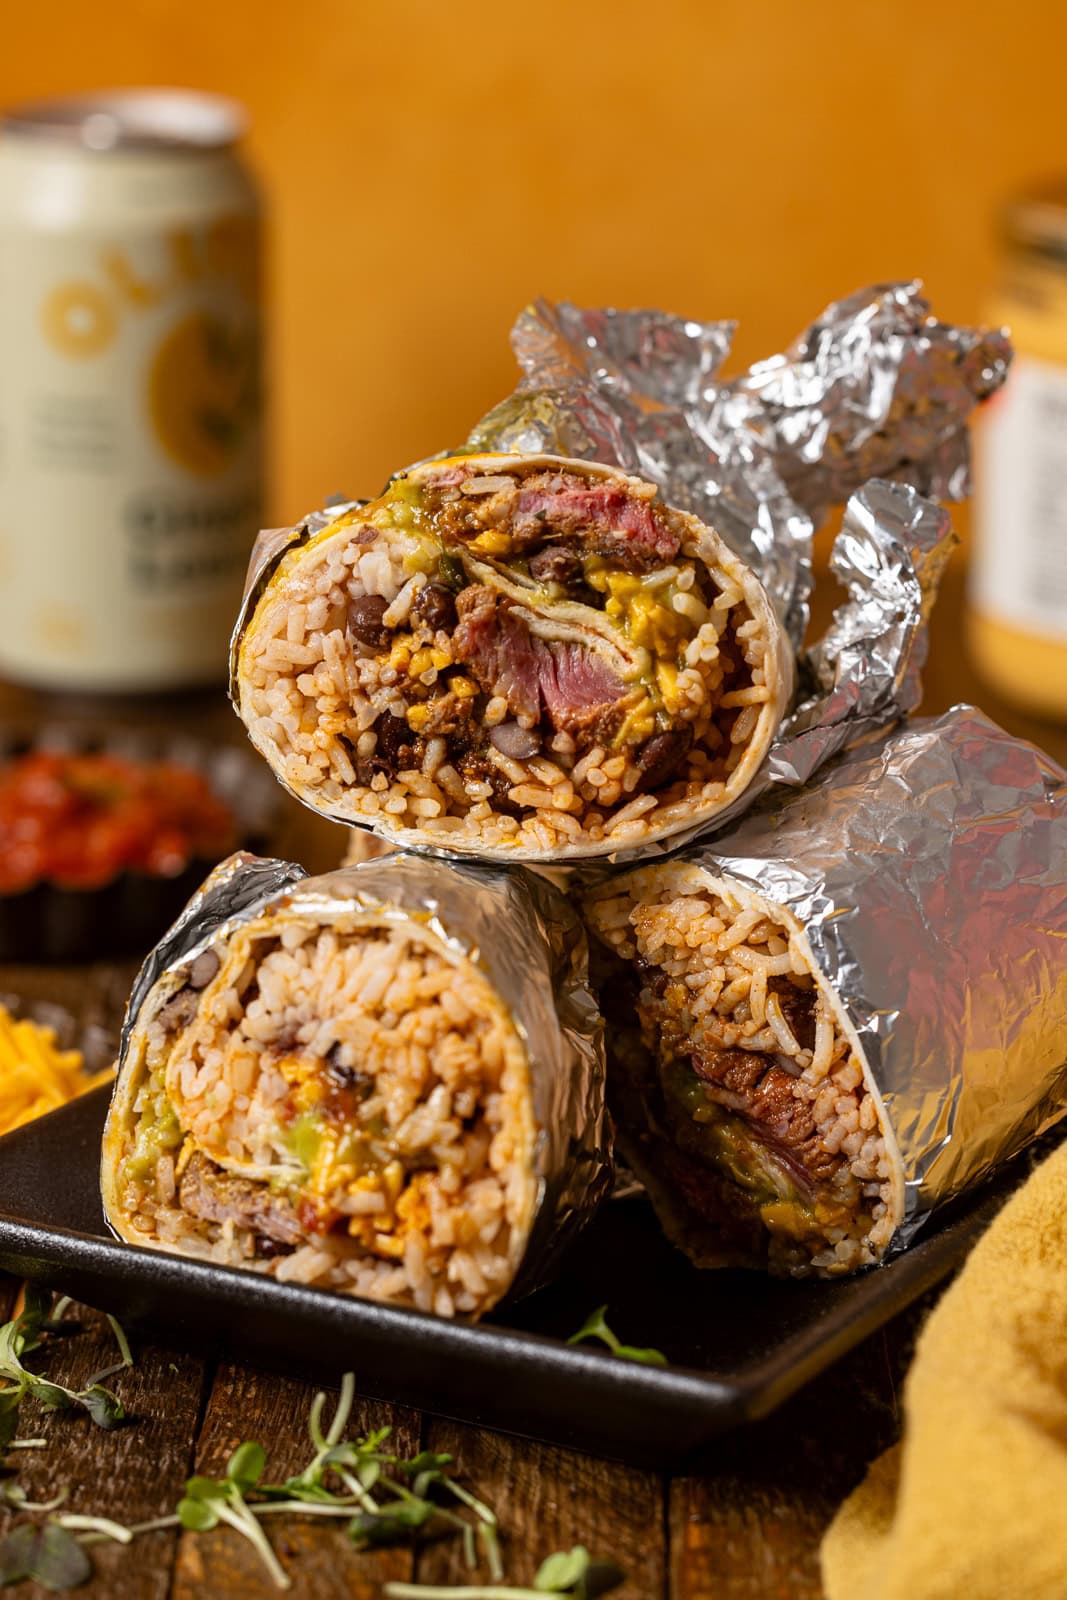 Stacked burritos on a platter with drinks and dips.